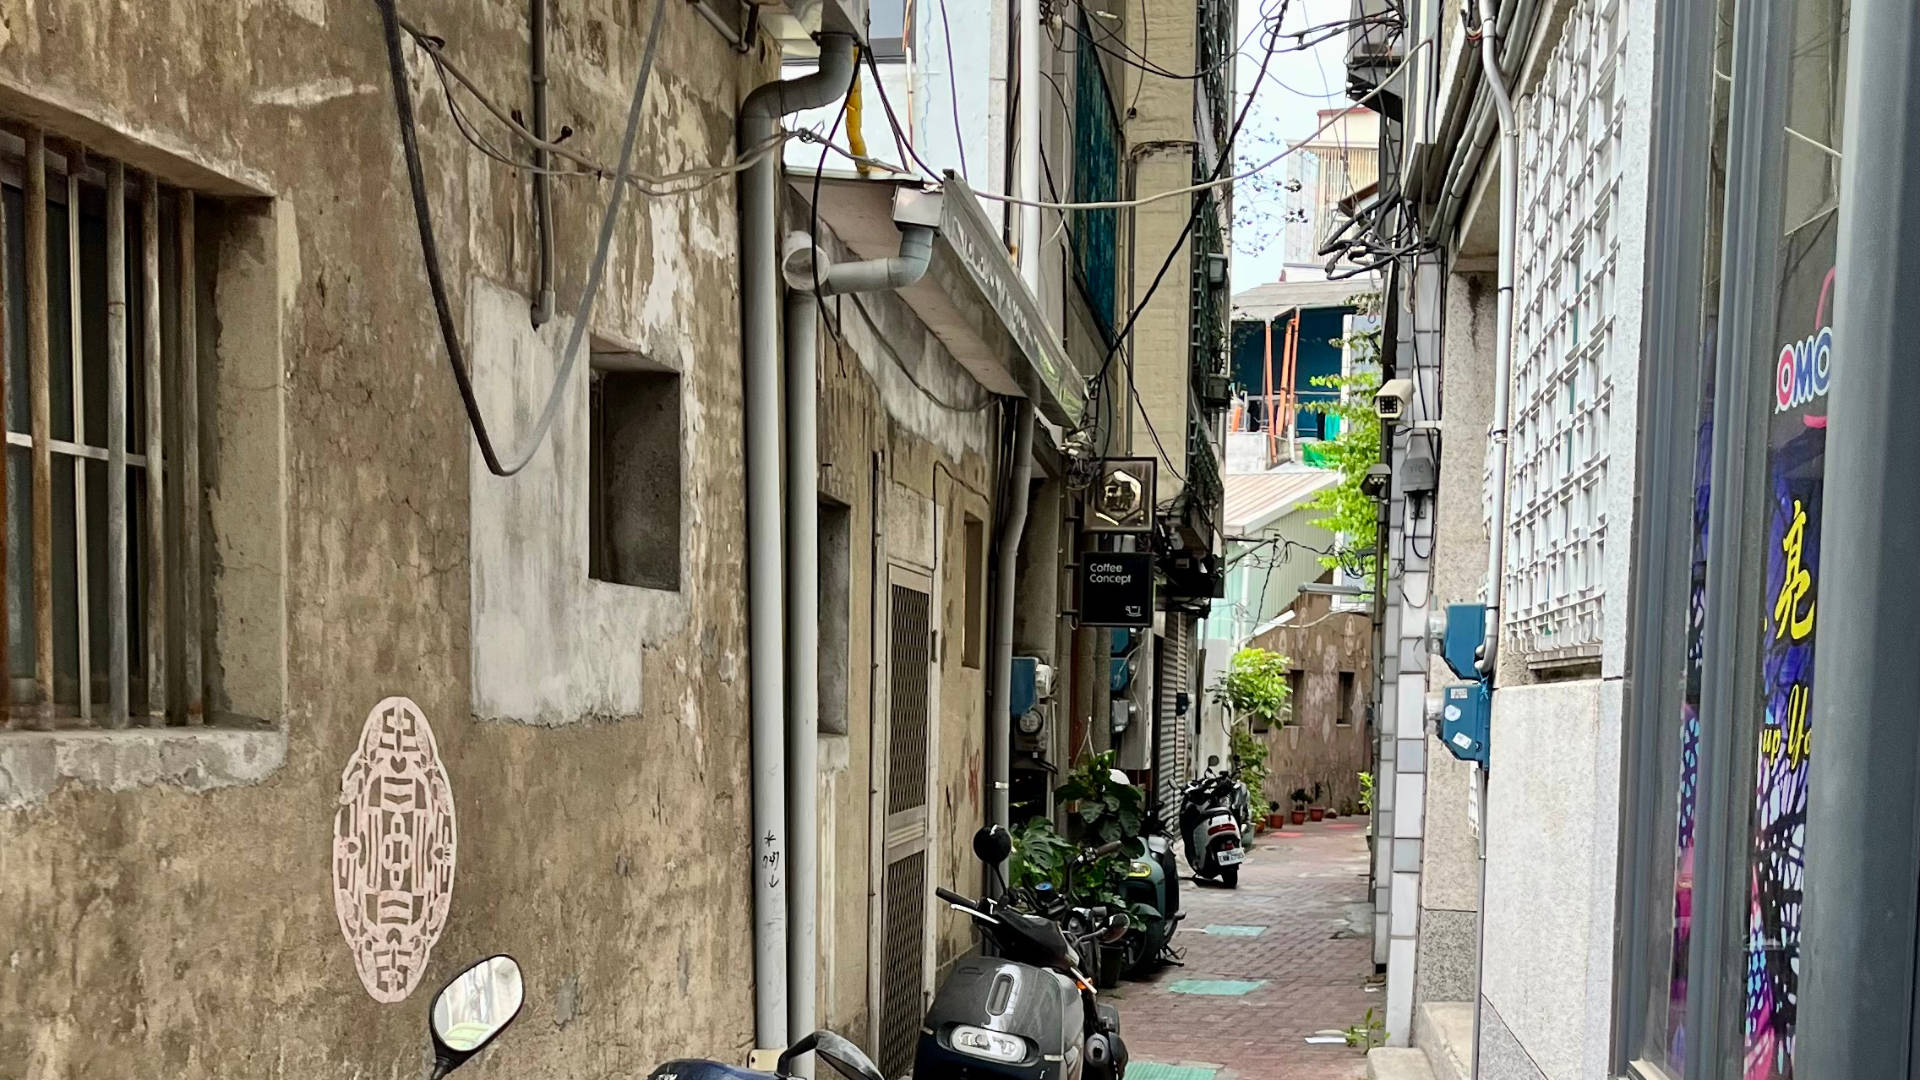 A narrow alleyway, paved in red brick with scooters parked on the left side. A mess of tangled electric cables hangs overhead.